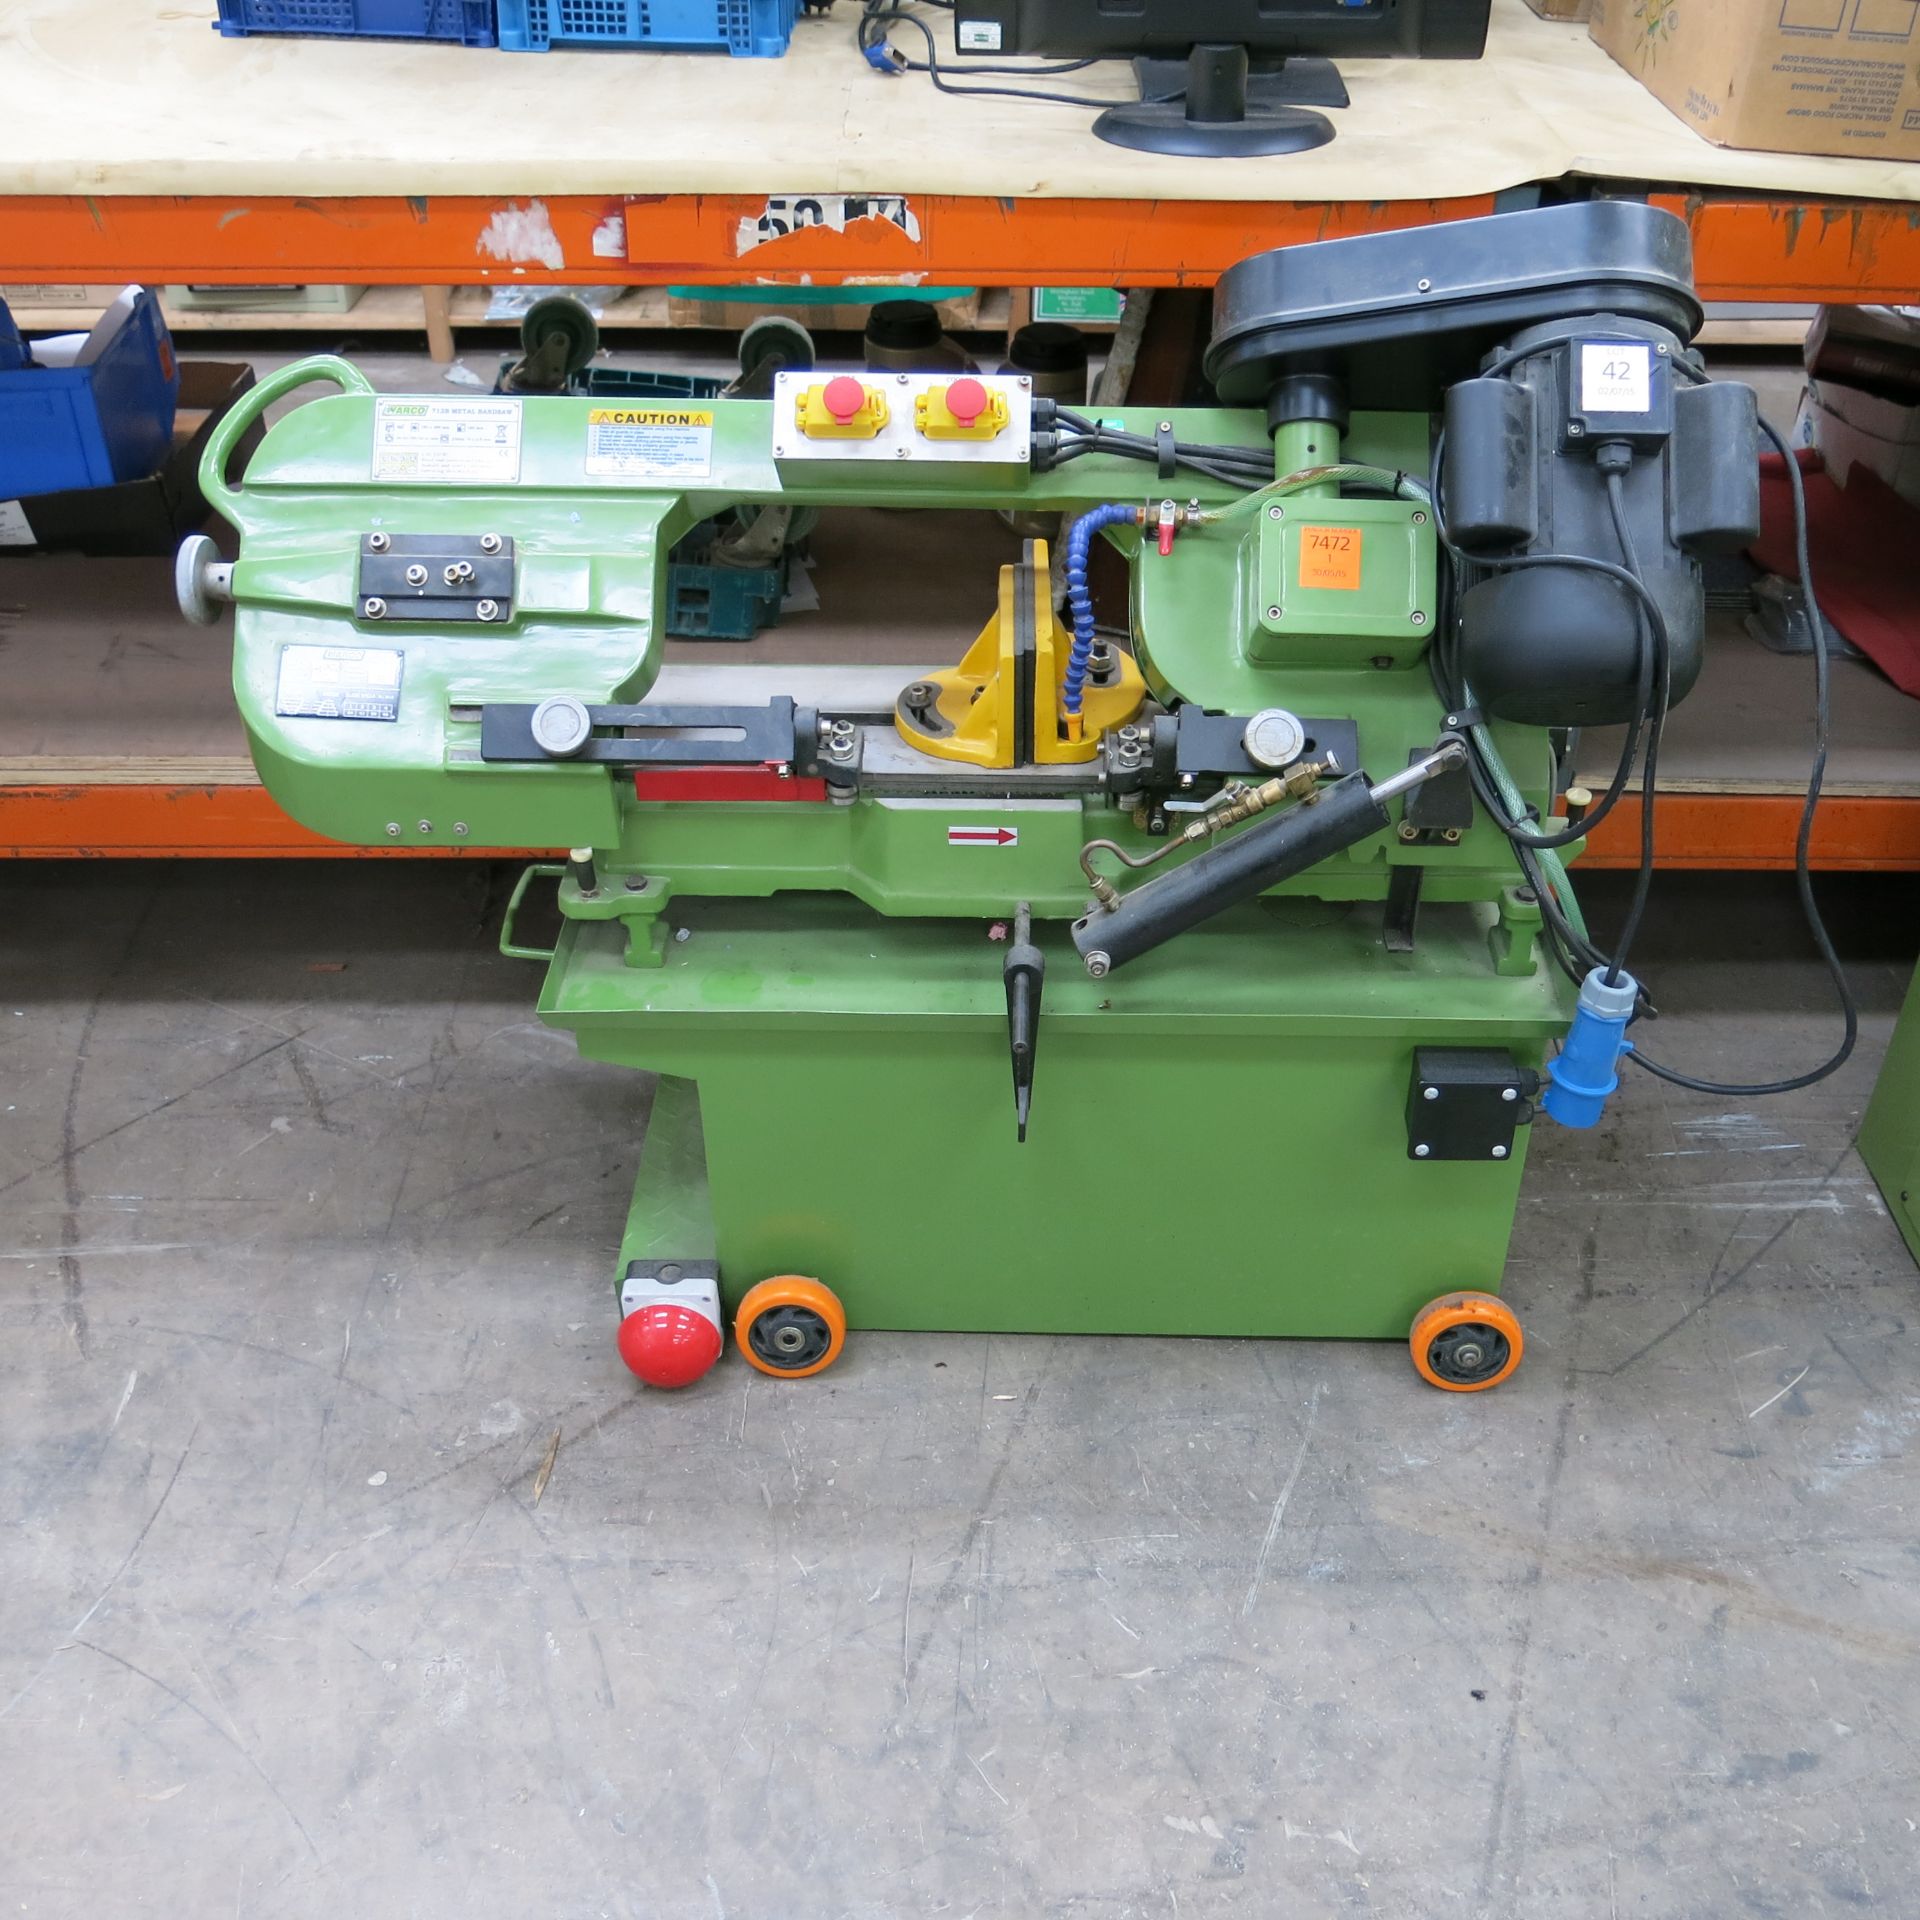 * A Warco 712B Metal Bandsaw 240V, year of manufacture 2010 SN 201009006. Please note, there is a £5